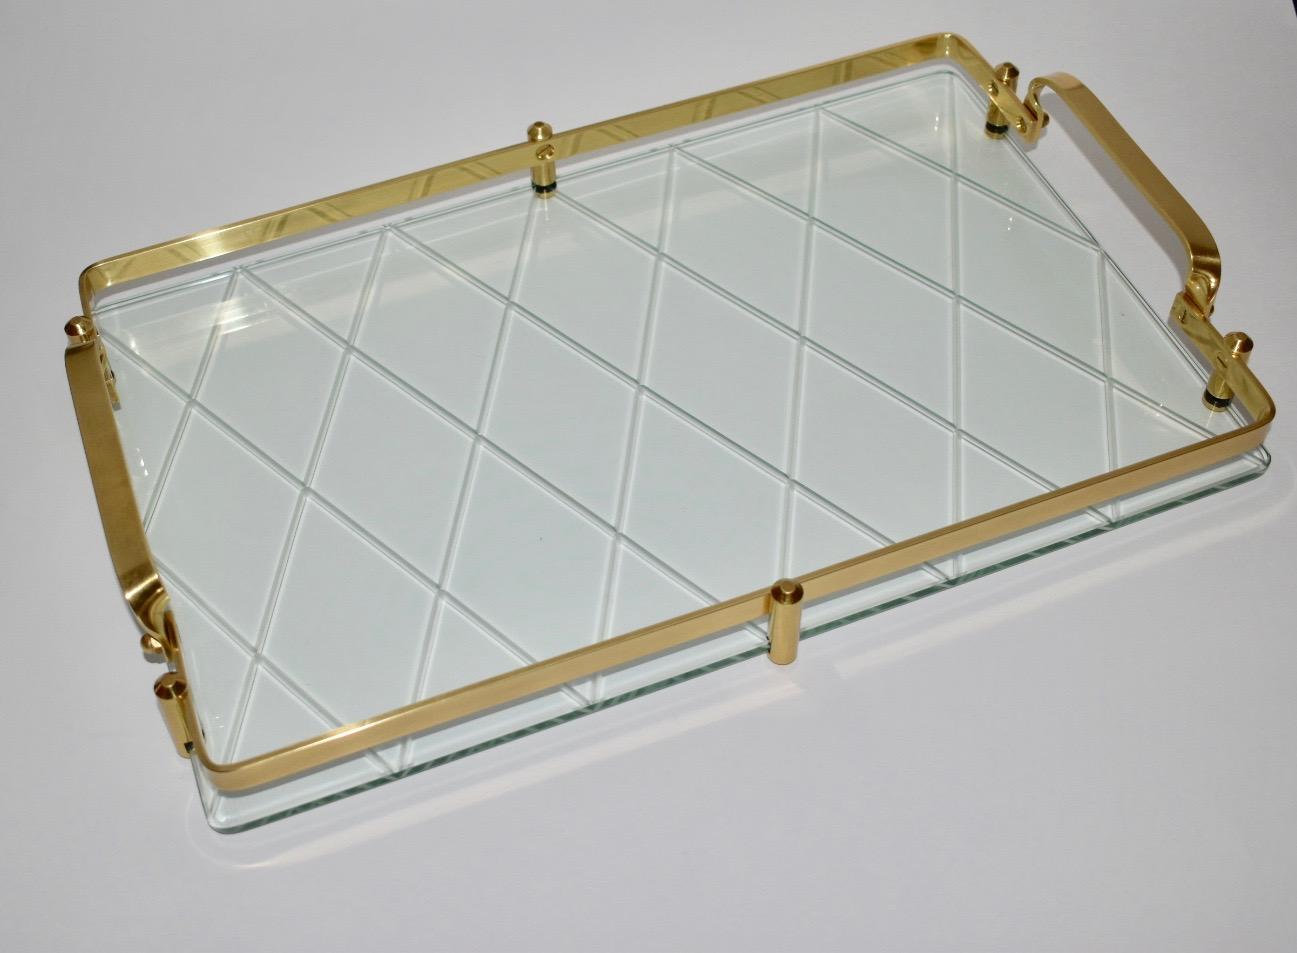 Stunning glass vanity tray with diamond or cross hatch motif with stylized brass gallery rails and handles in the style of Pietro Chiesa for Fontana Arte or Tommi Parzinger. The pattern to the back of glass was cut with a copper wheel with very fine